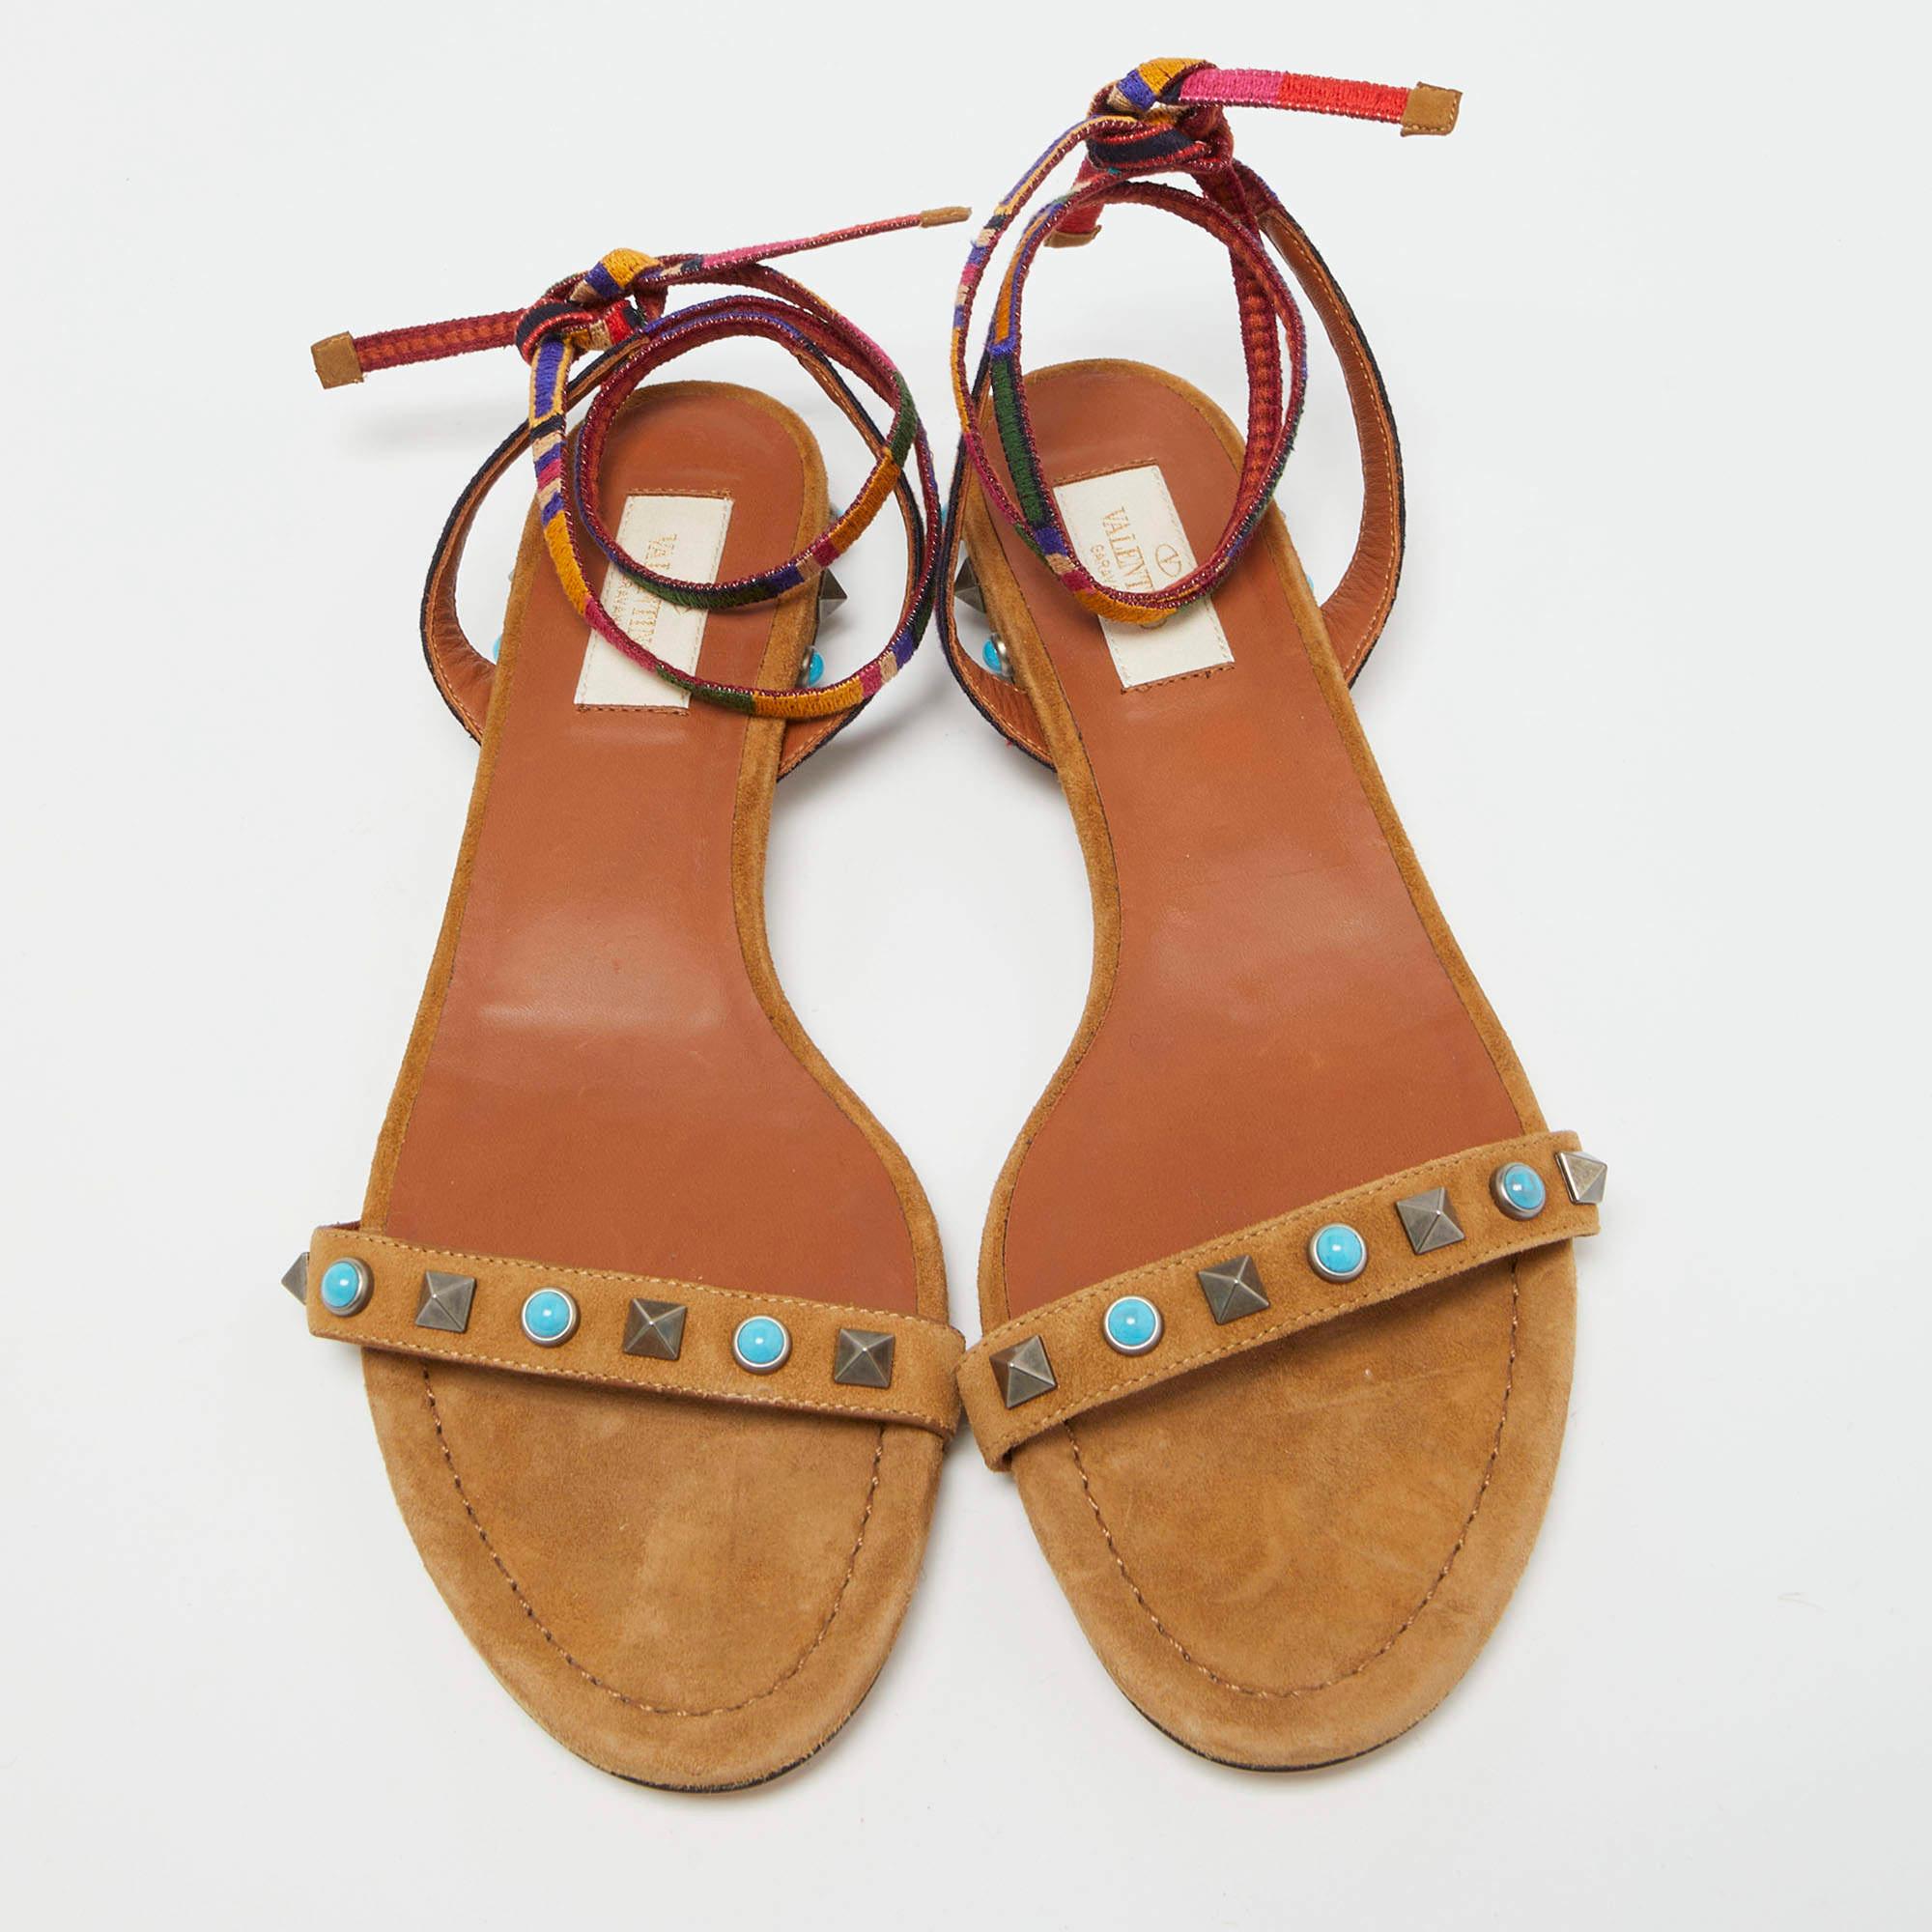 Create effortless casual styles with these Valentino flat sandals. Made of suede, they are designed to elevate your OOTD and keep you in comfort all day long.

